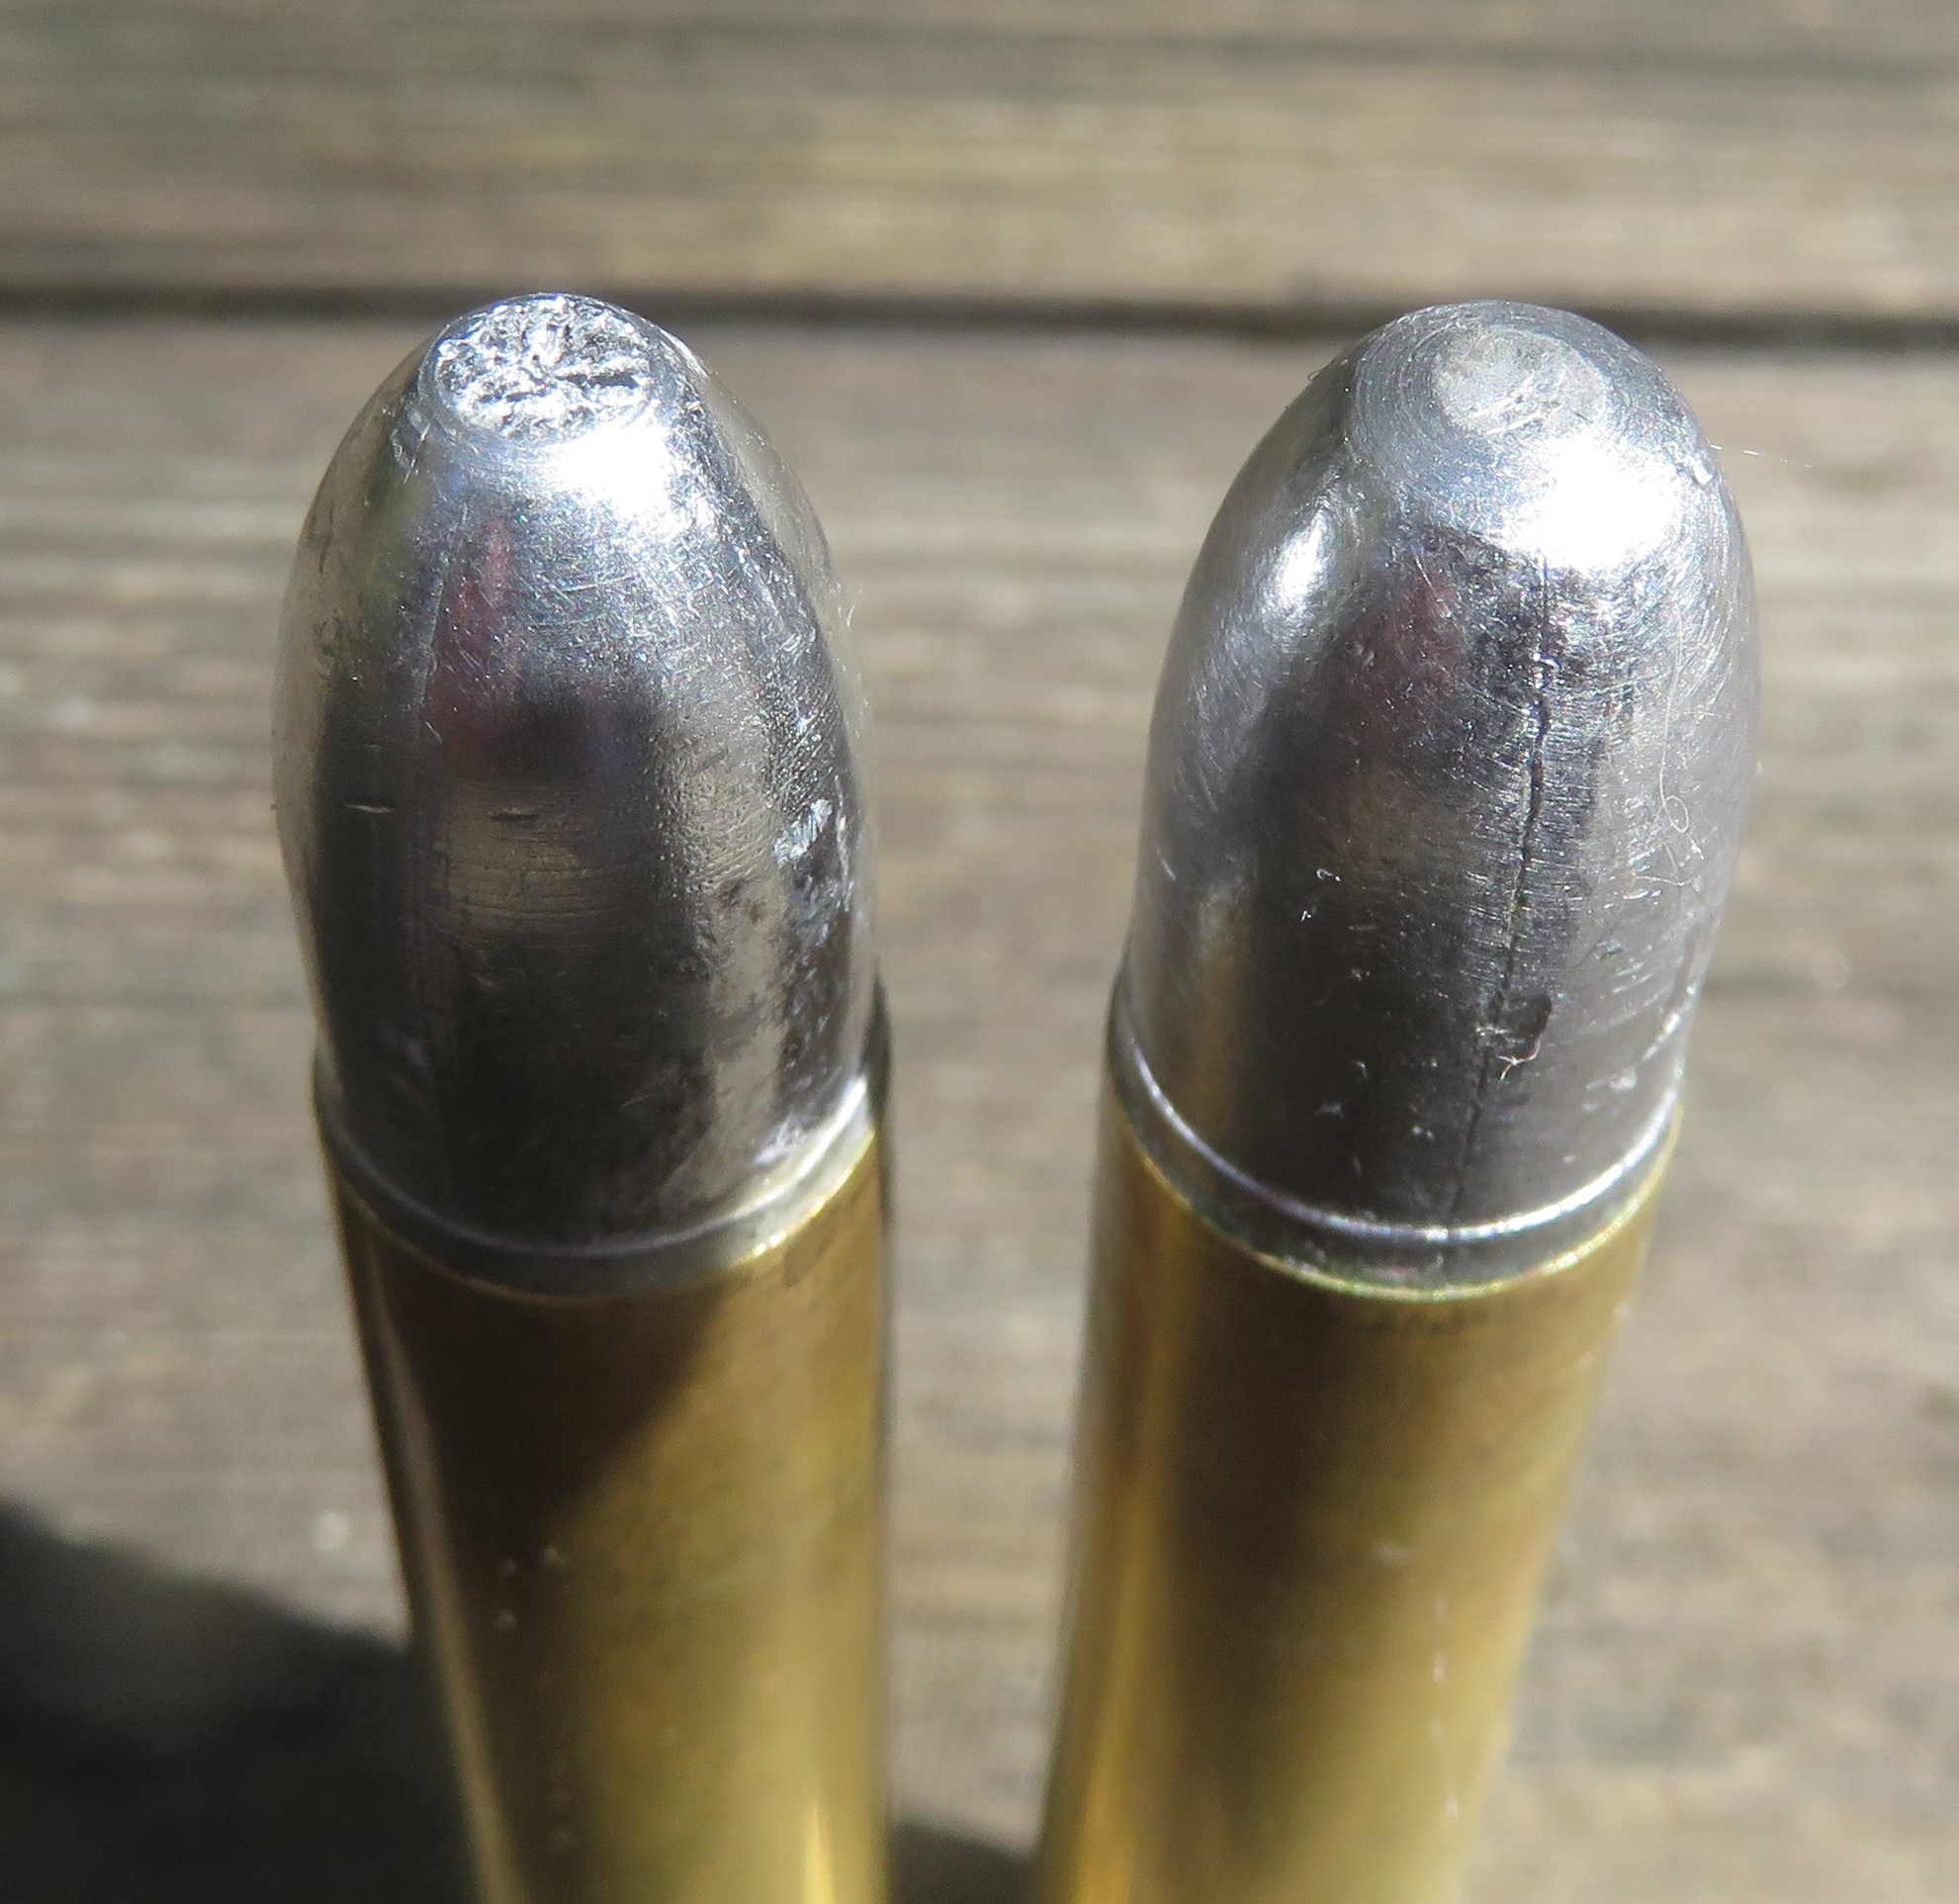 Why are black powder bullets gray and grainy looking and not brass